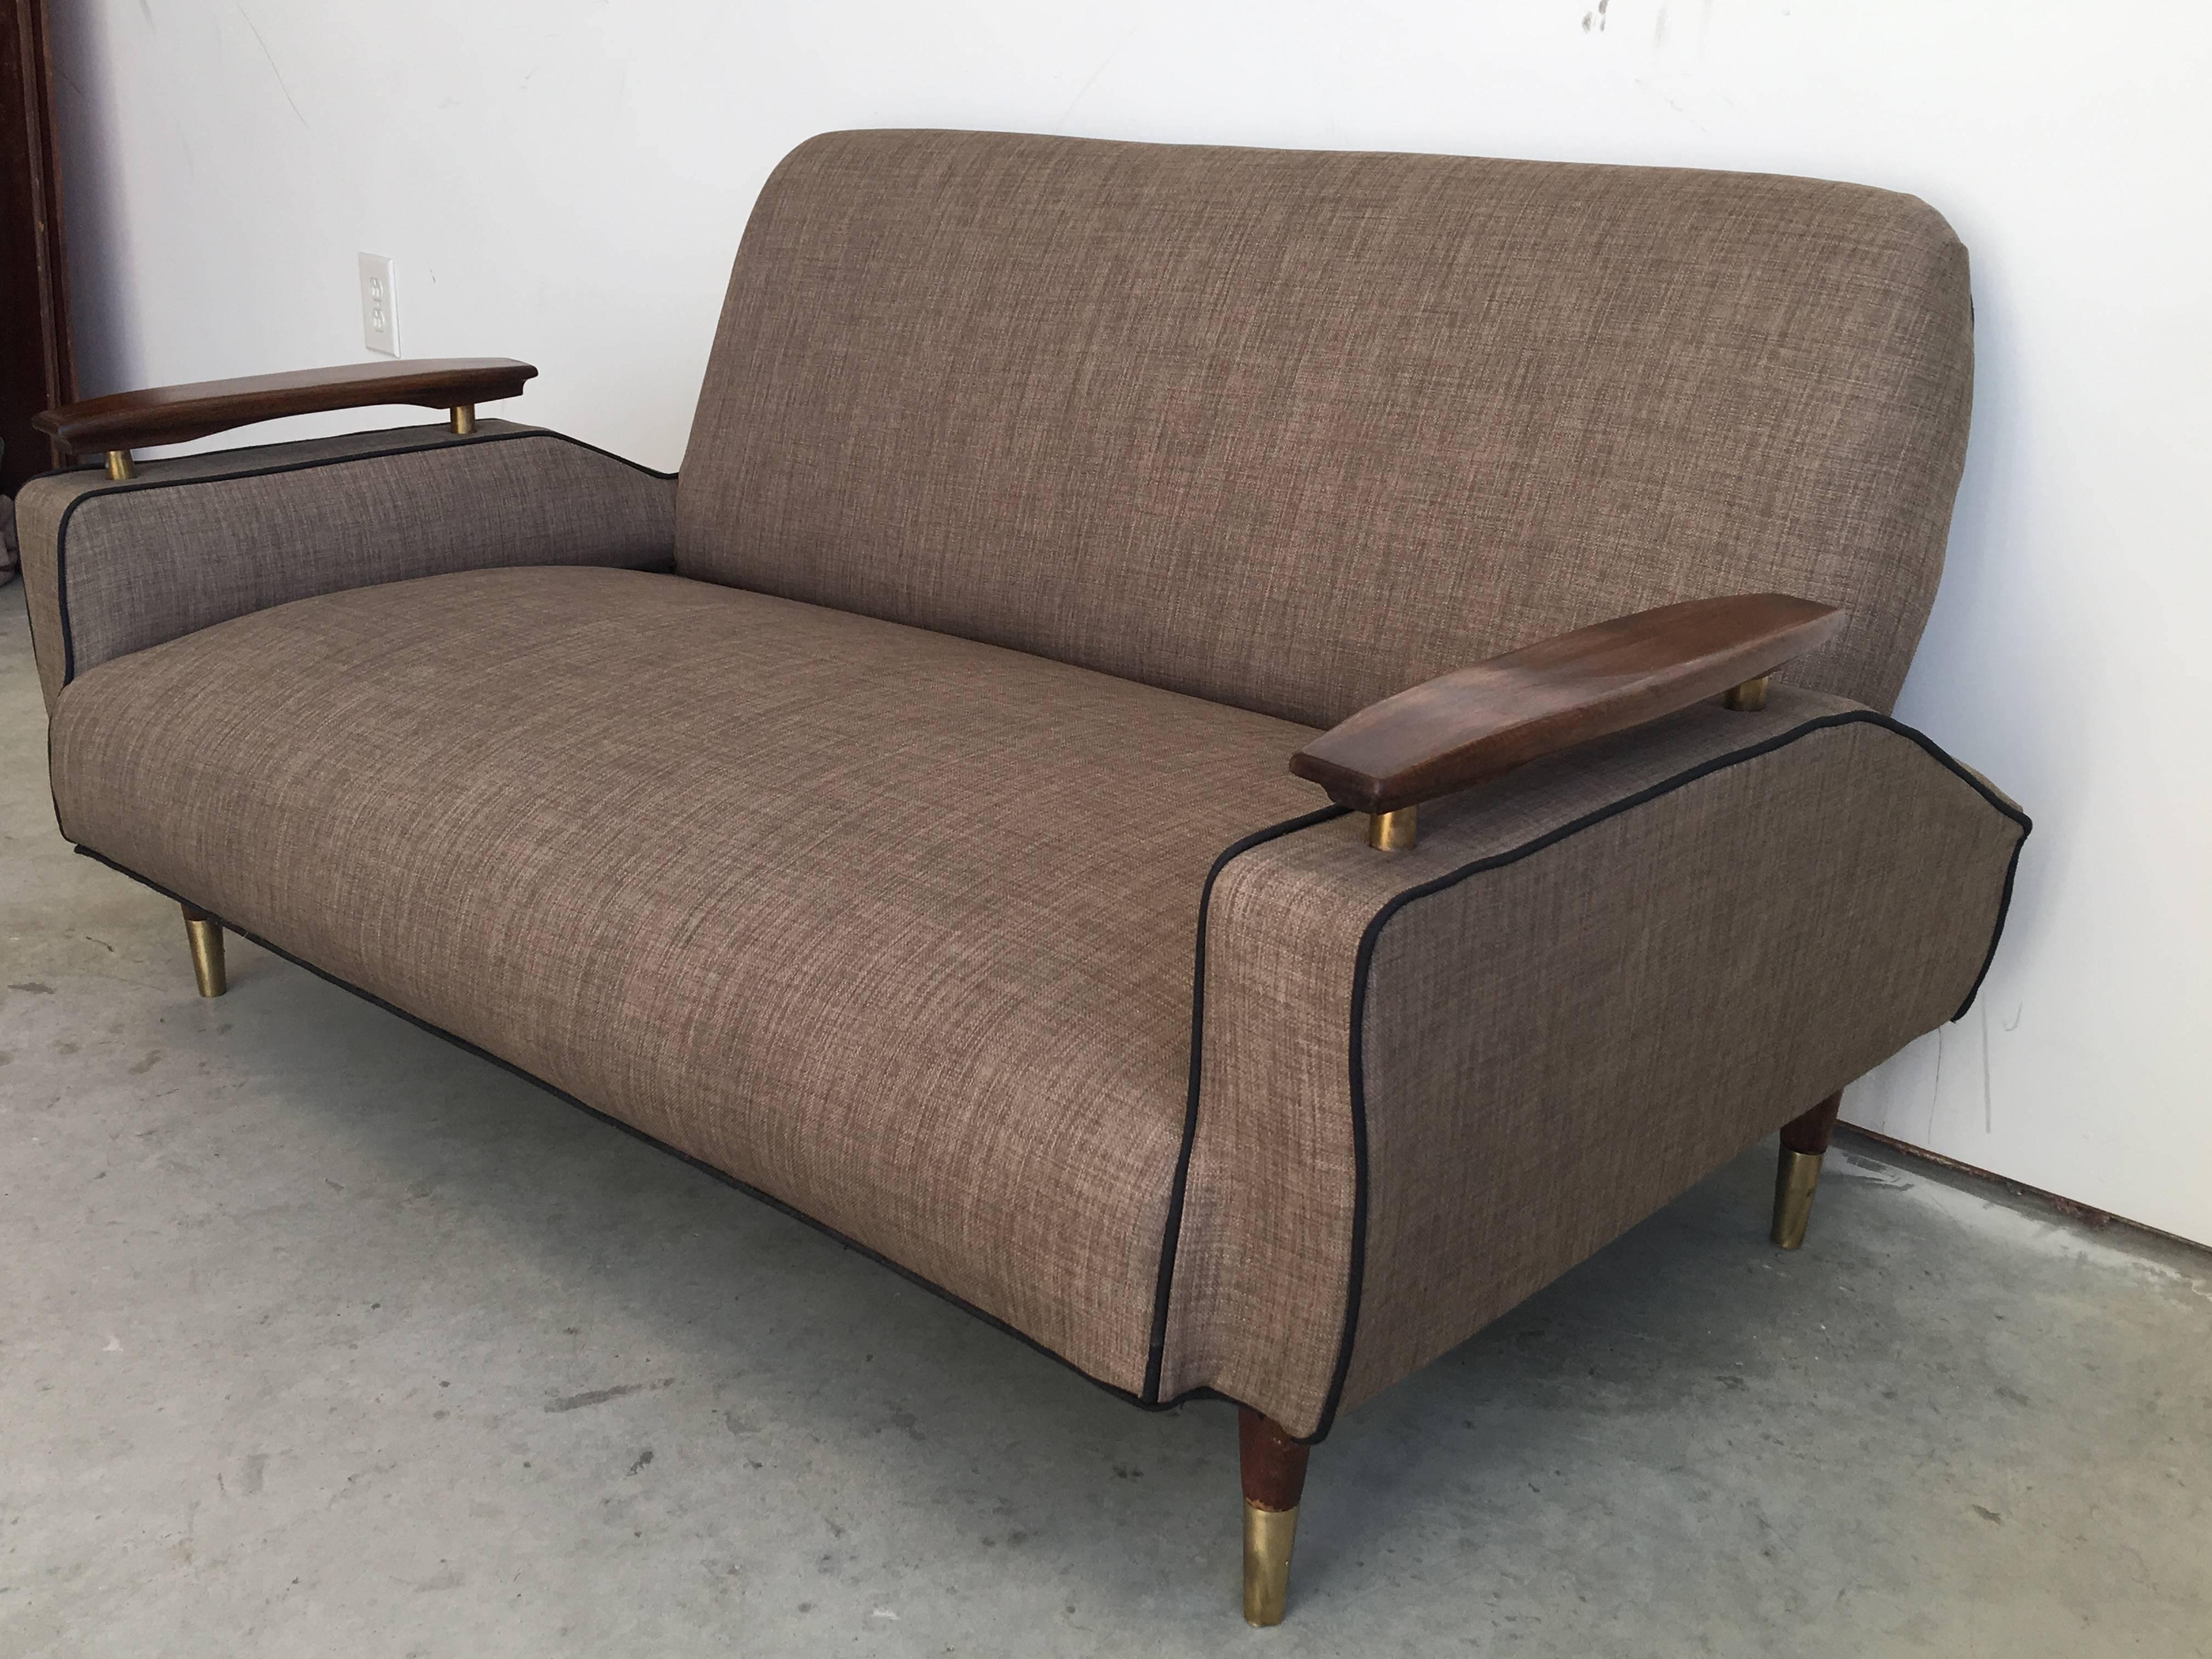 Offered is an immaculate, 1940s French deco sofa. The piece is upholstered in a tan or brown fabric, accented by floating walnut arms and brass detailing. Fabric is a coarse linen blend.